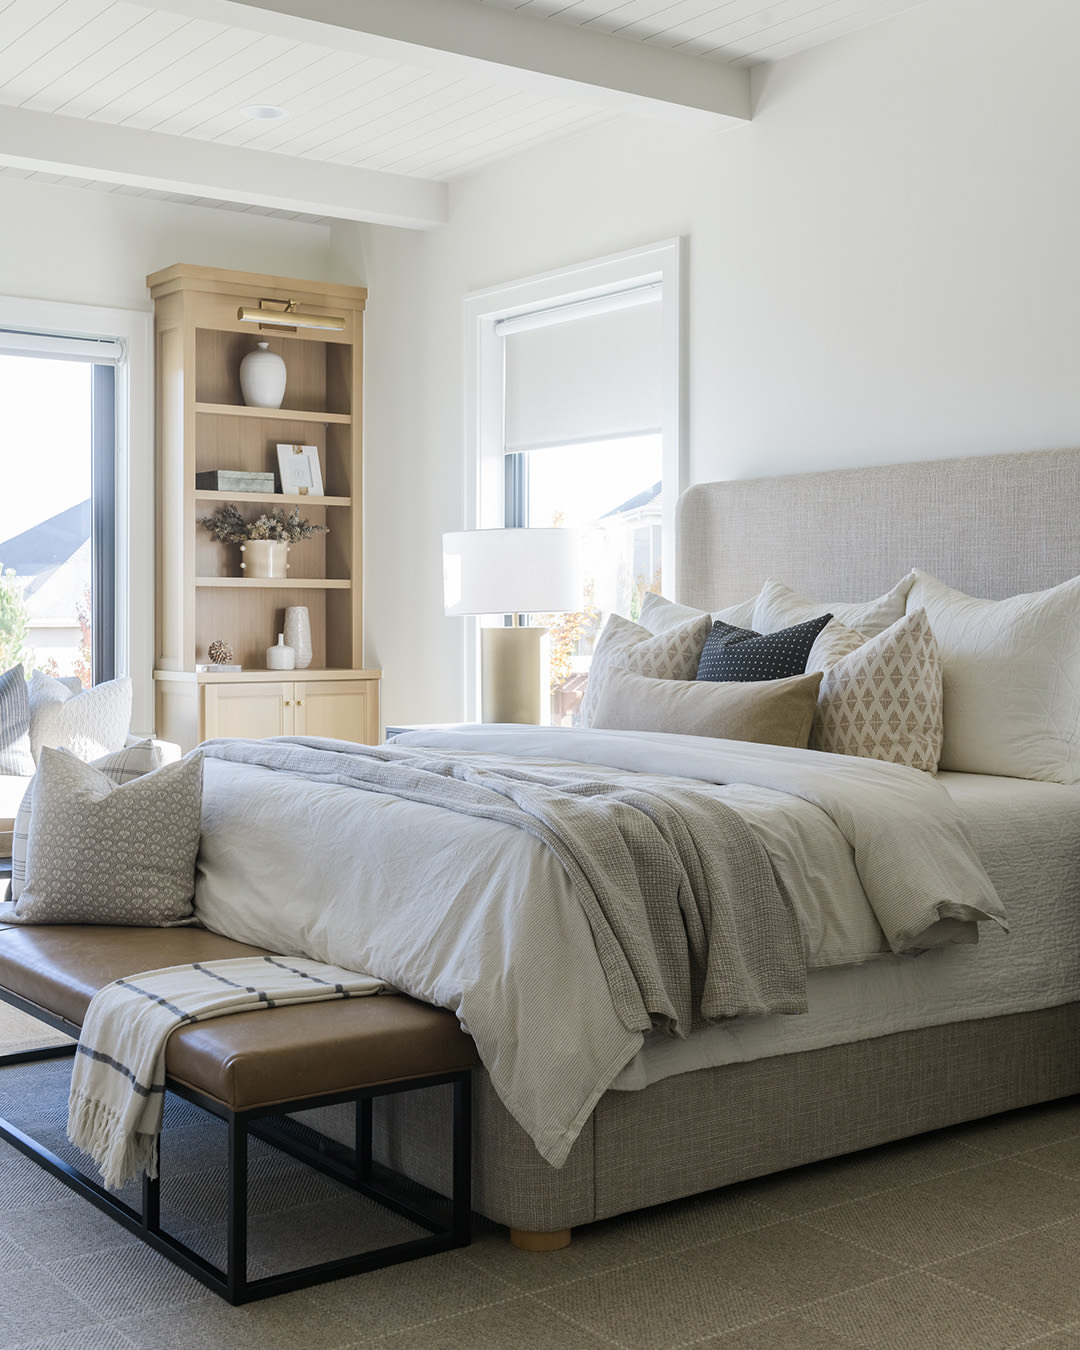 Subtle Beams and White Shiplap for a Restful Bedroom